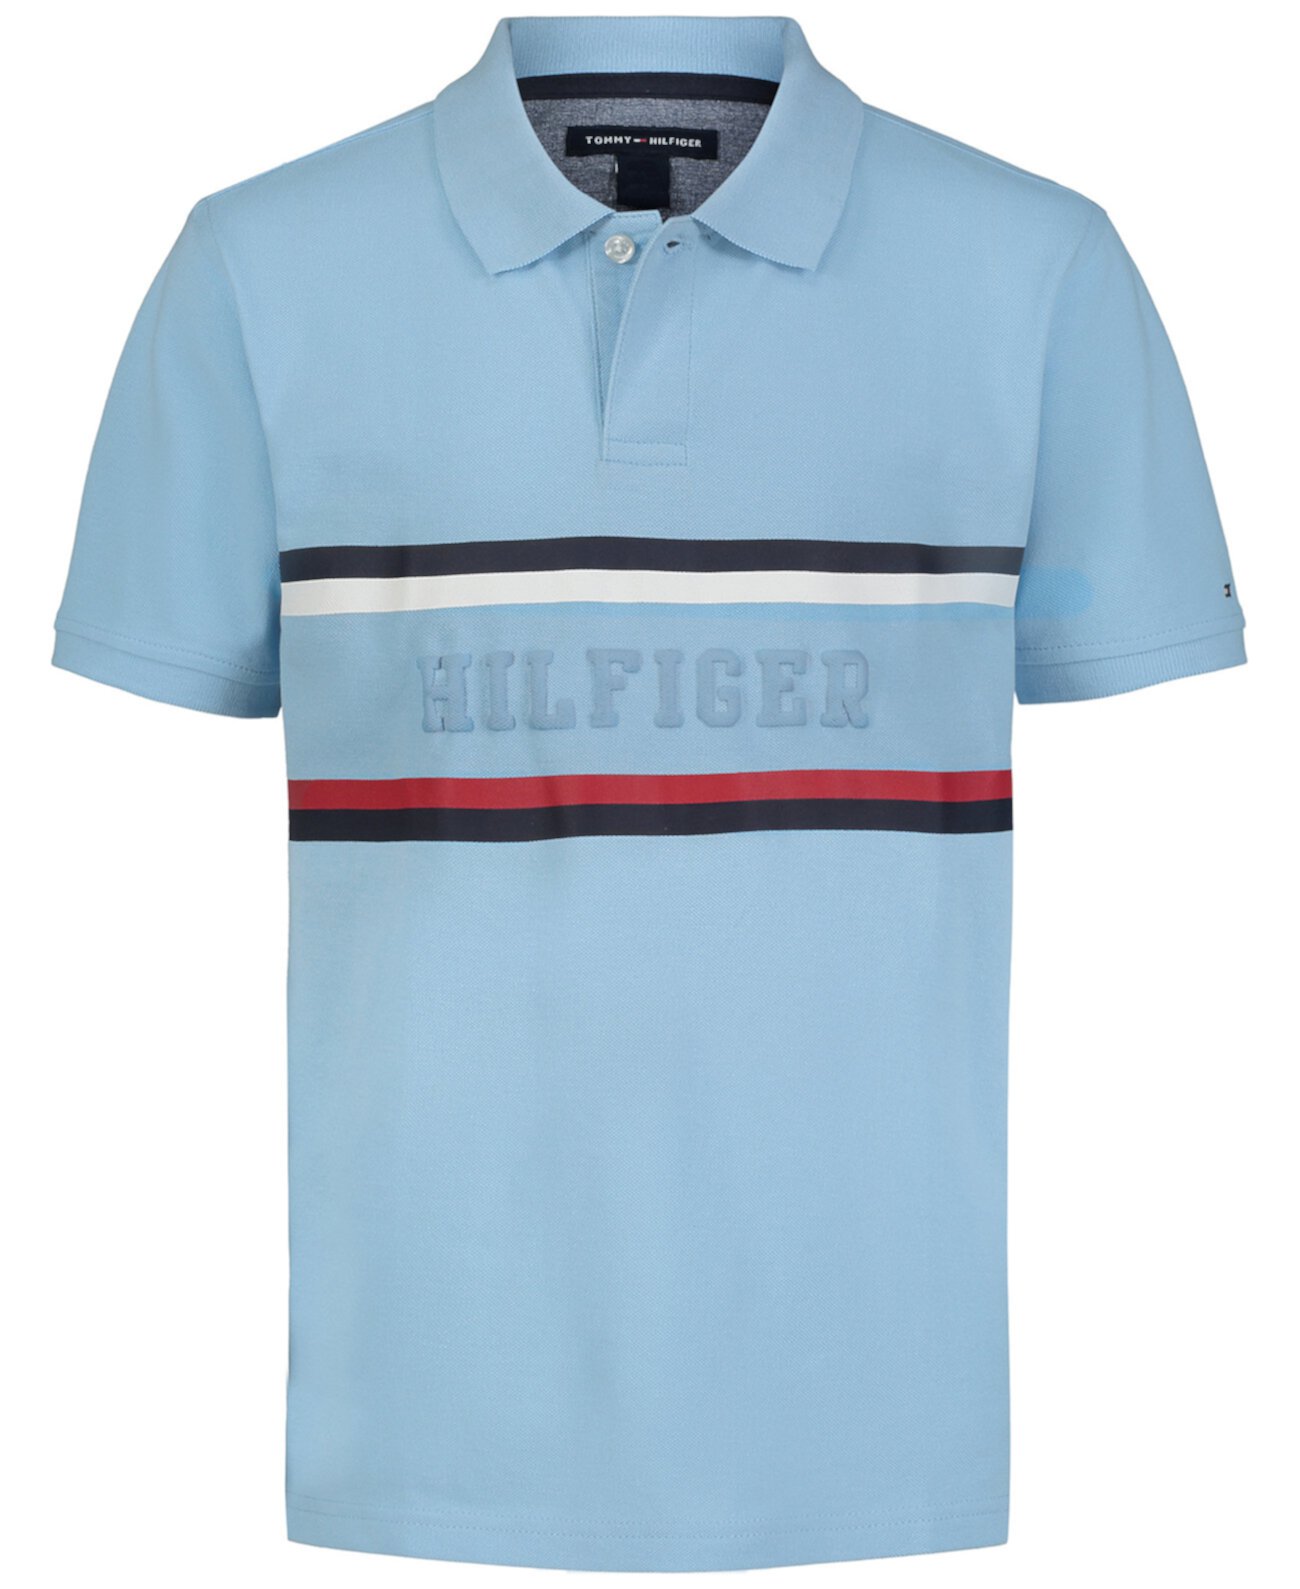 Футболка Мальчикам Tommy Hilfiger Global Chest Polo Tommy Hilfiger